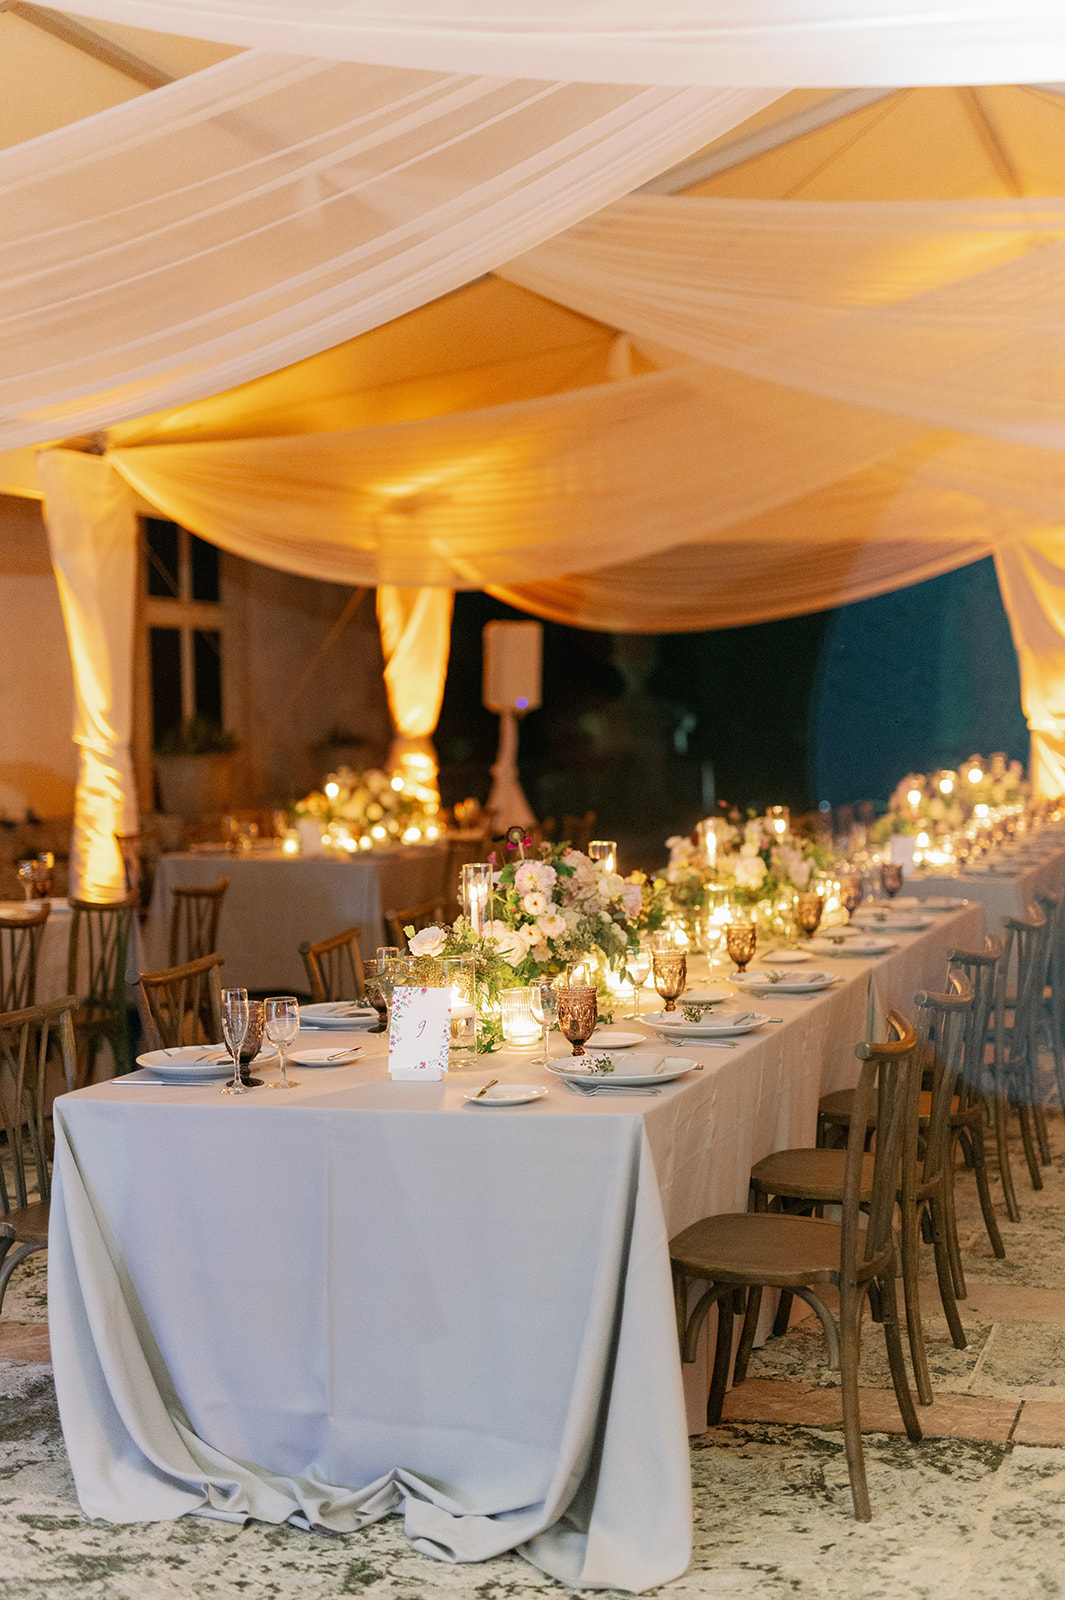 Romantic candlelit tented wedding reception dinner at Vizcaya Museum and Gardens.